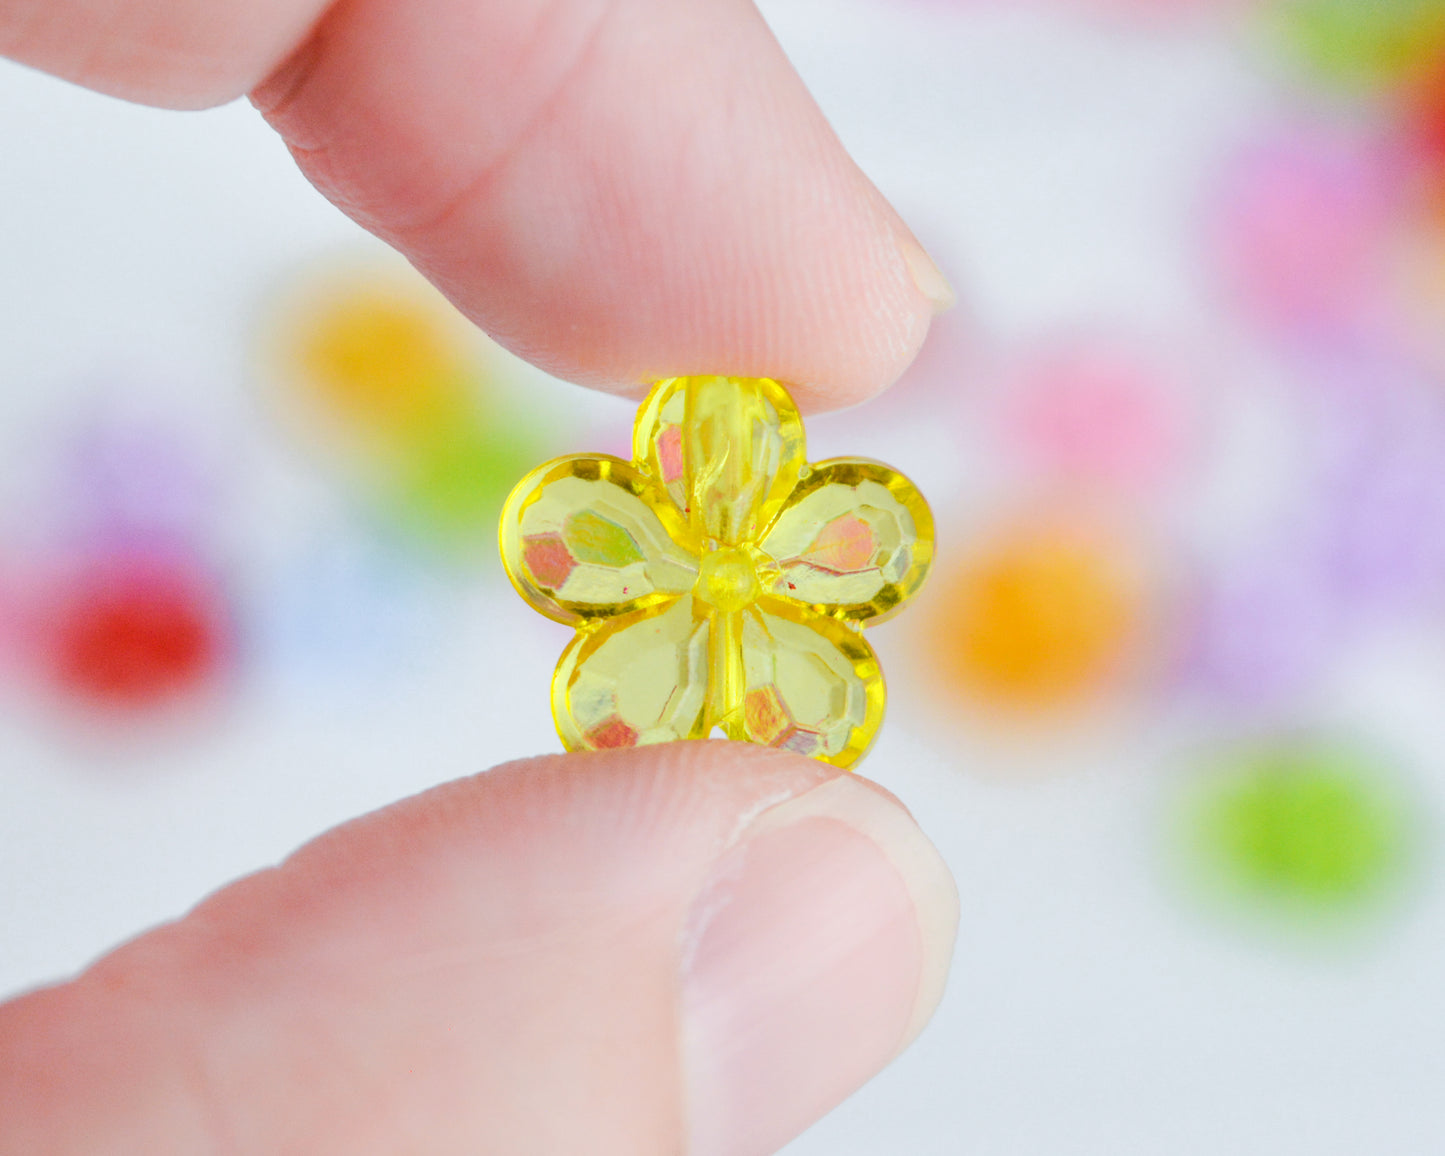 14mm Faceted Flower Beads in Transparent Acrylic